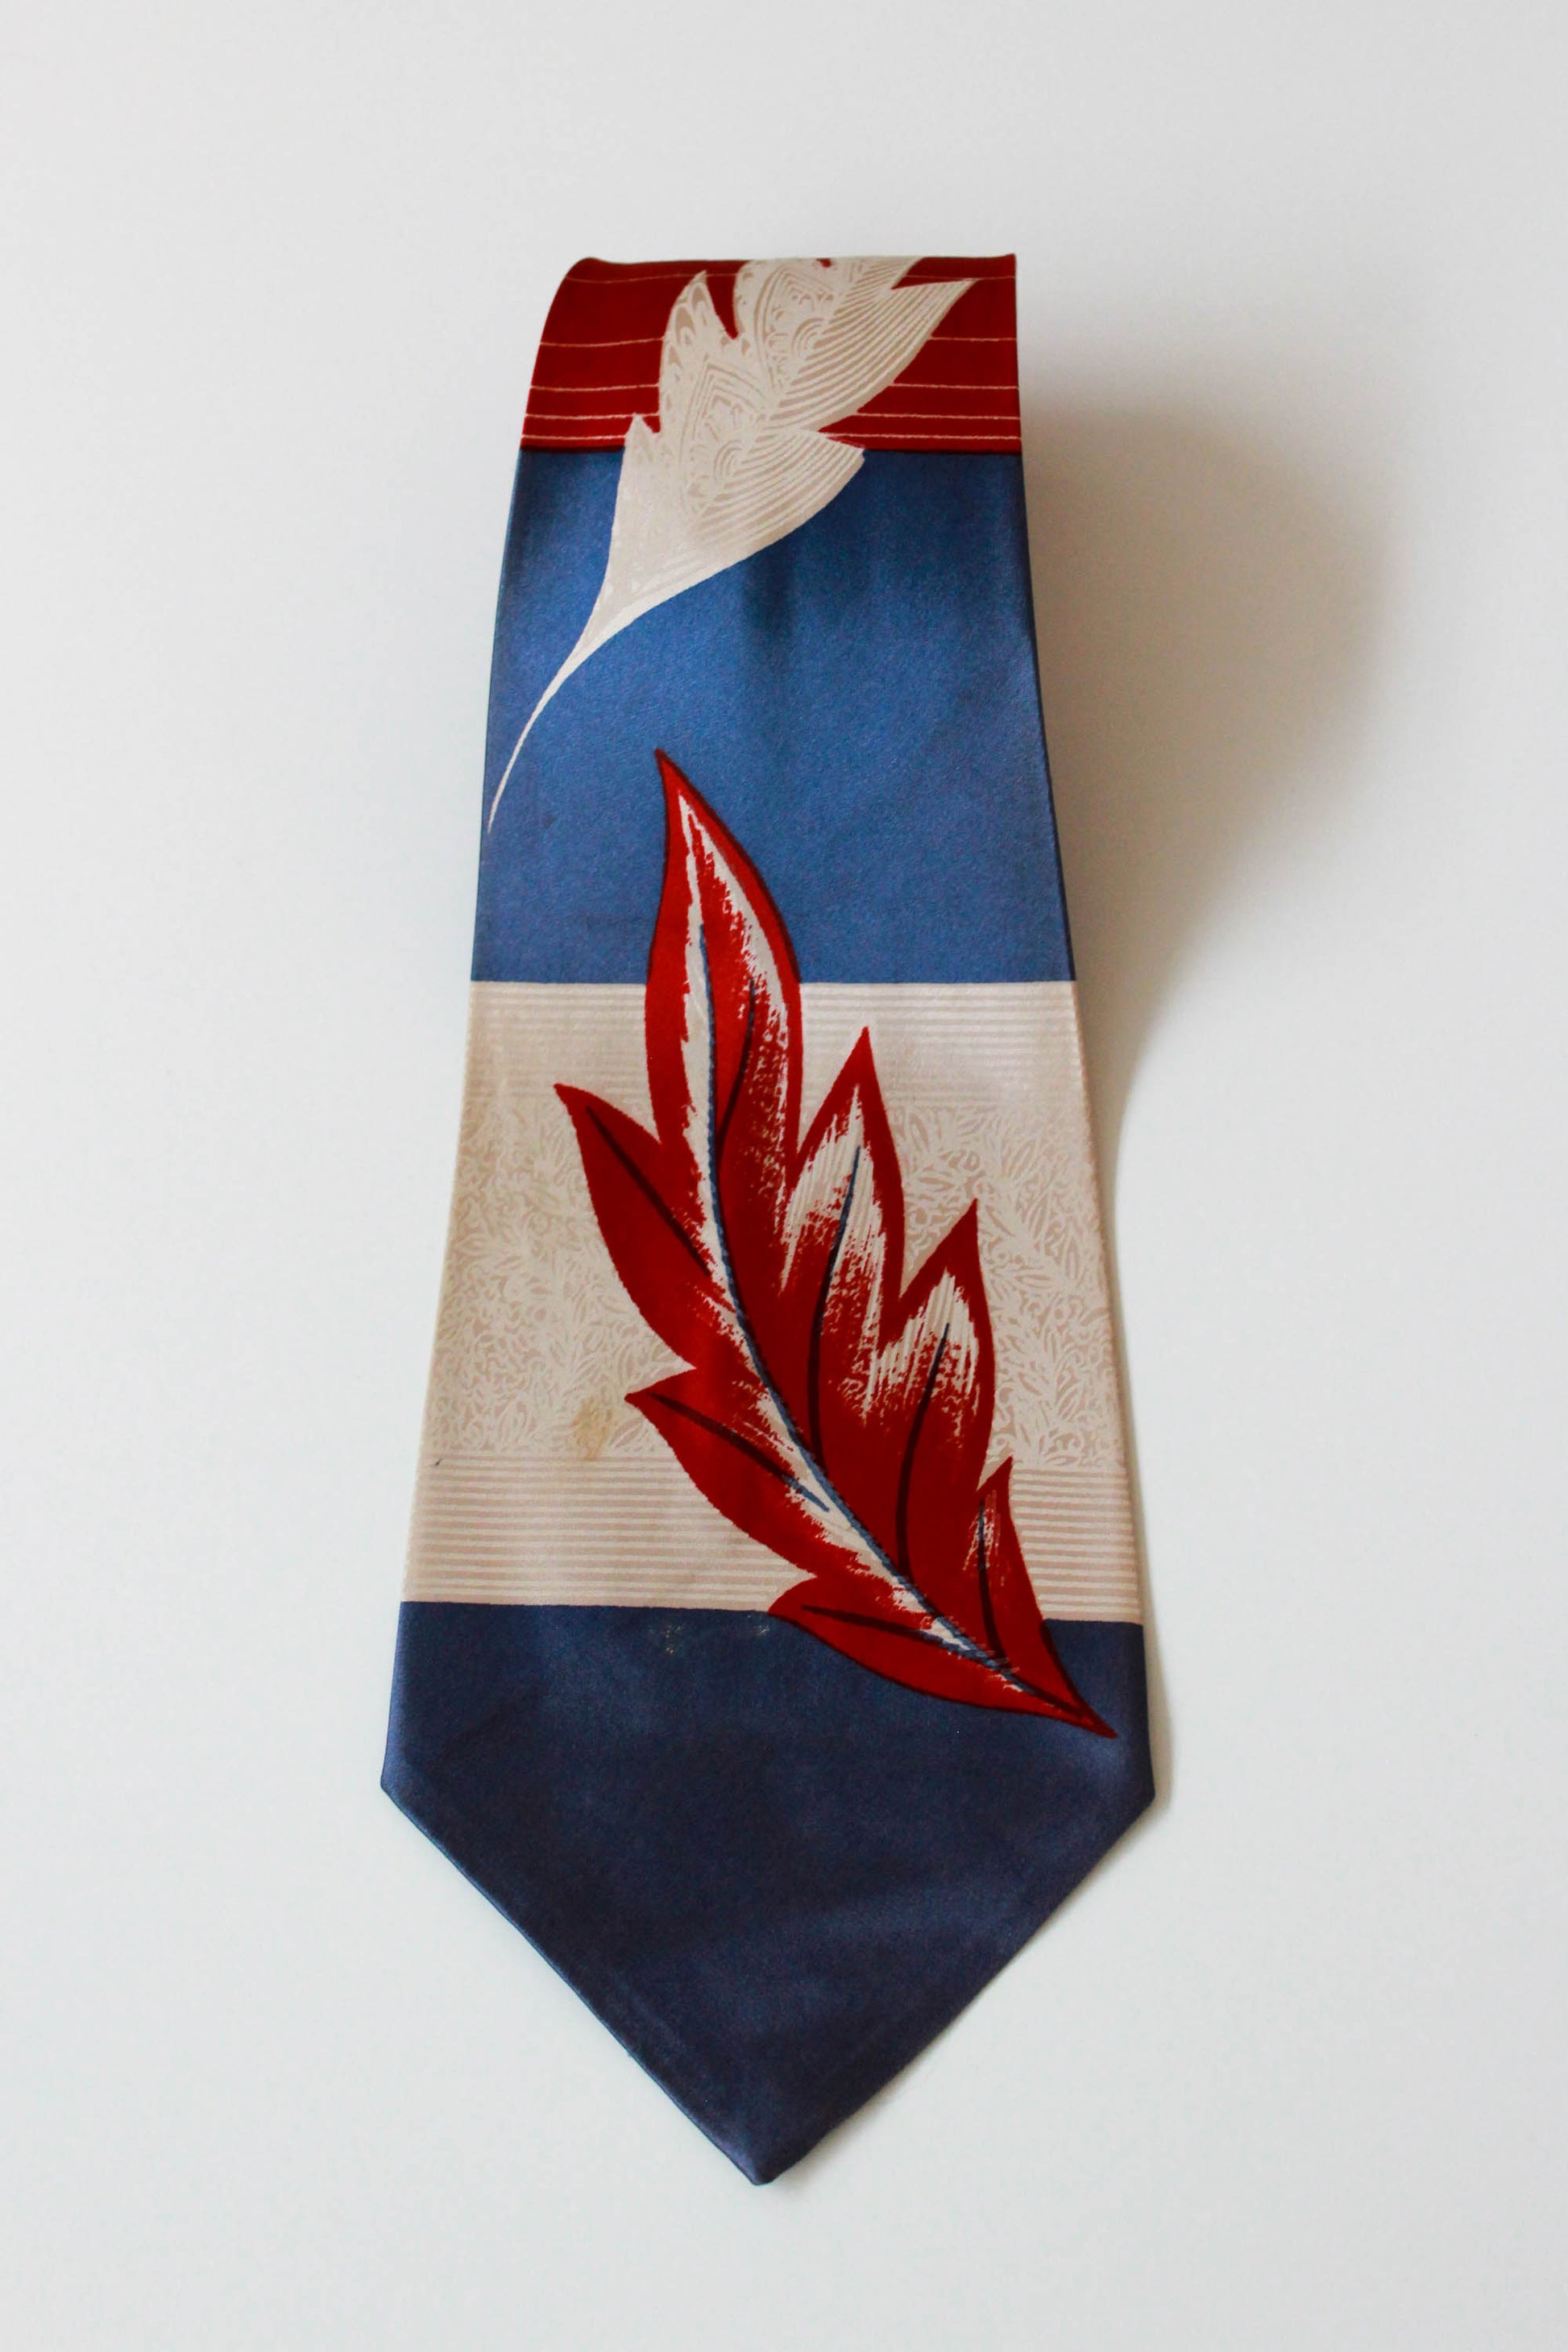 1940s rayon necktie blue, beige and red with large falling leaf pattern, by fashion craft, 1940s wide tongue bold look vintage tie